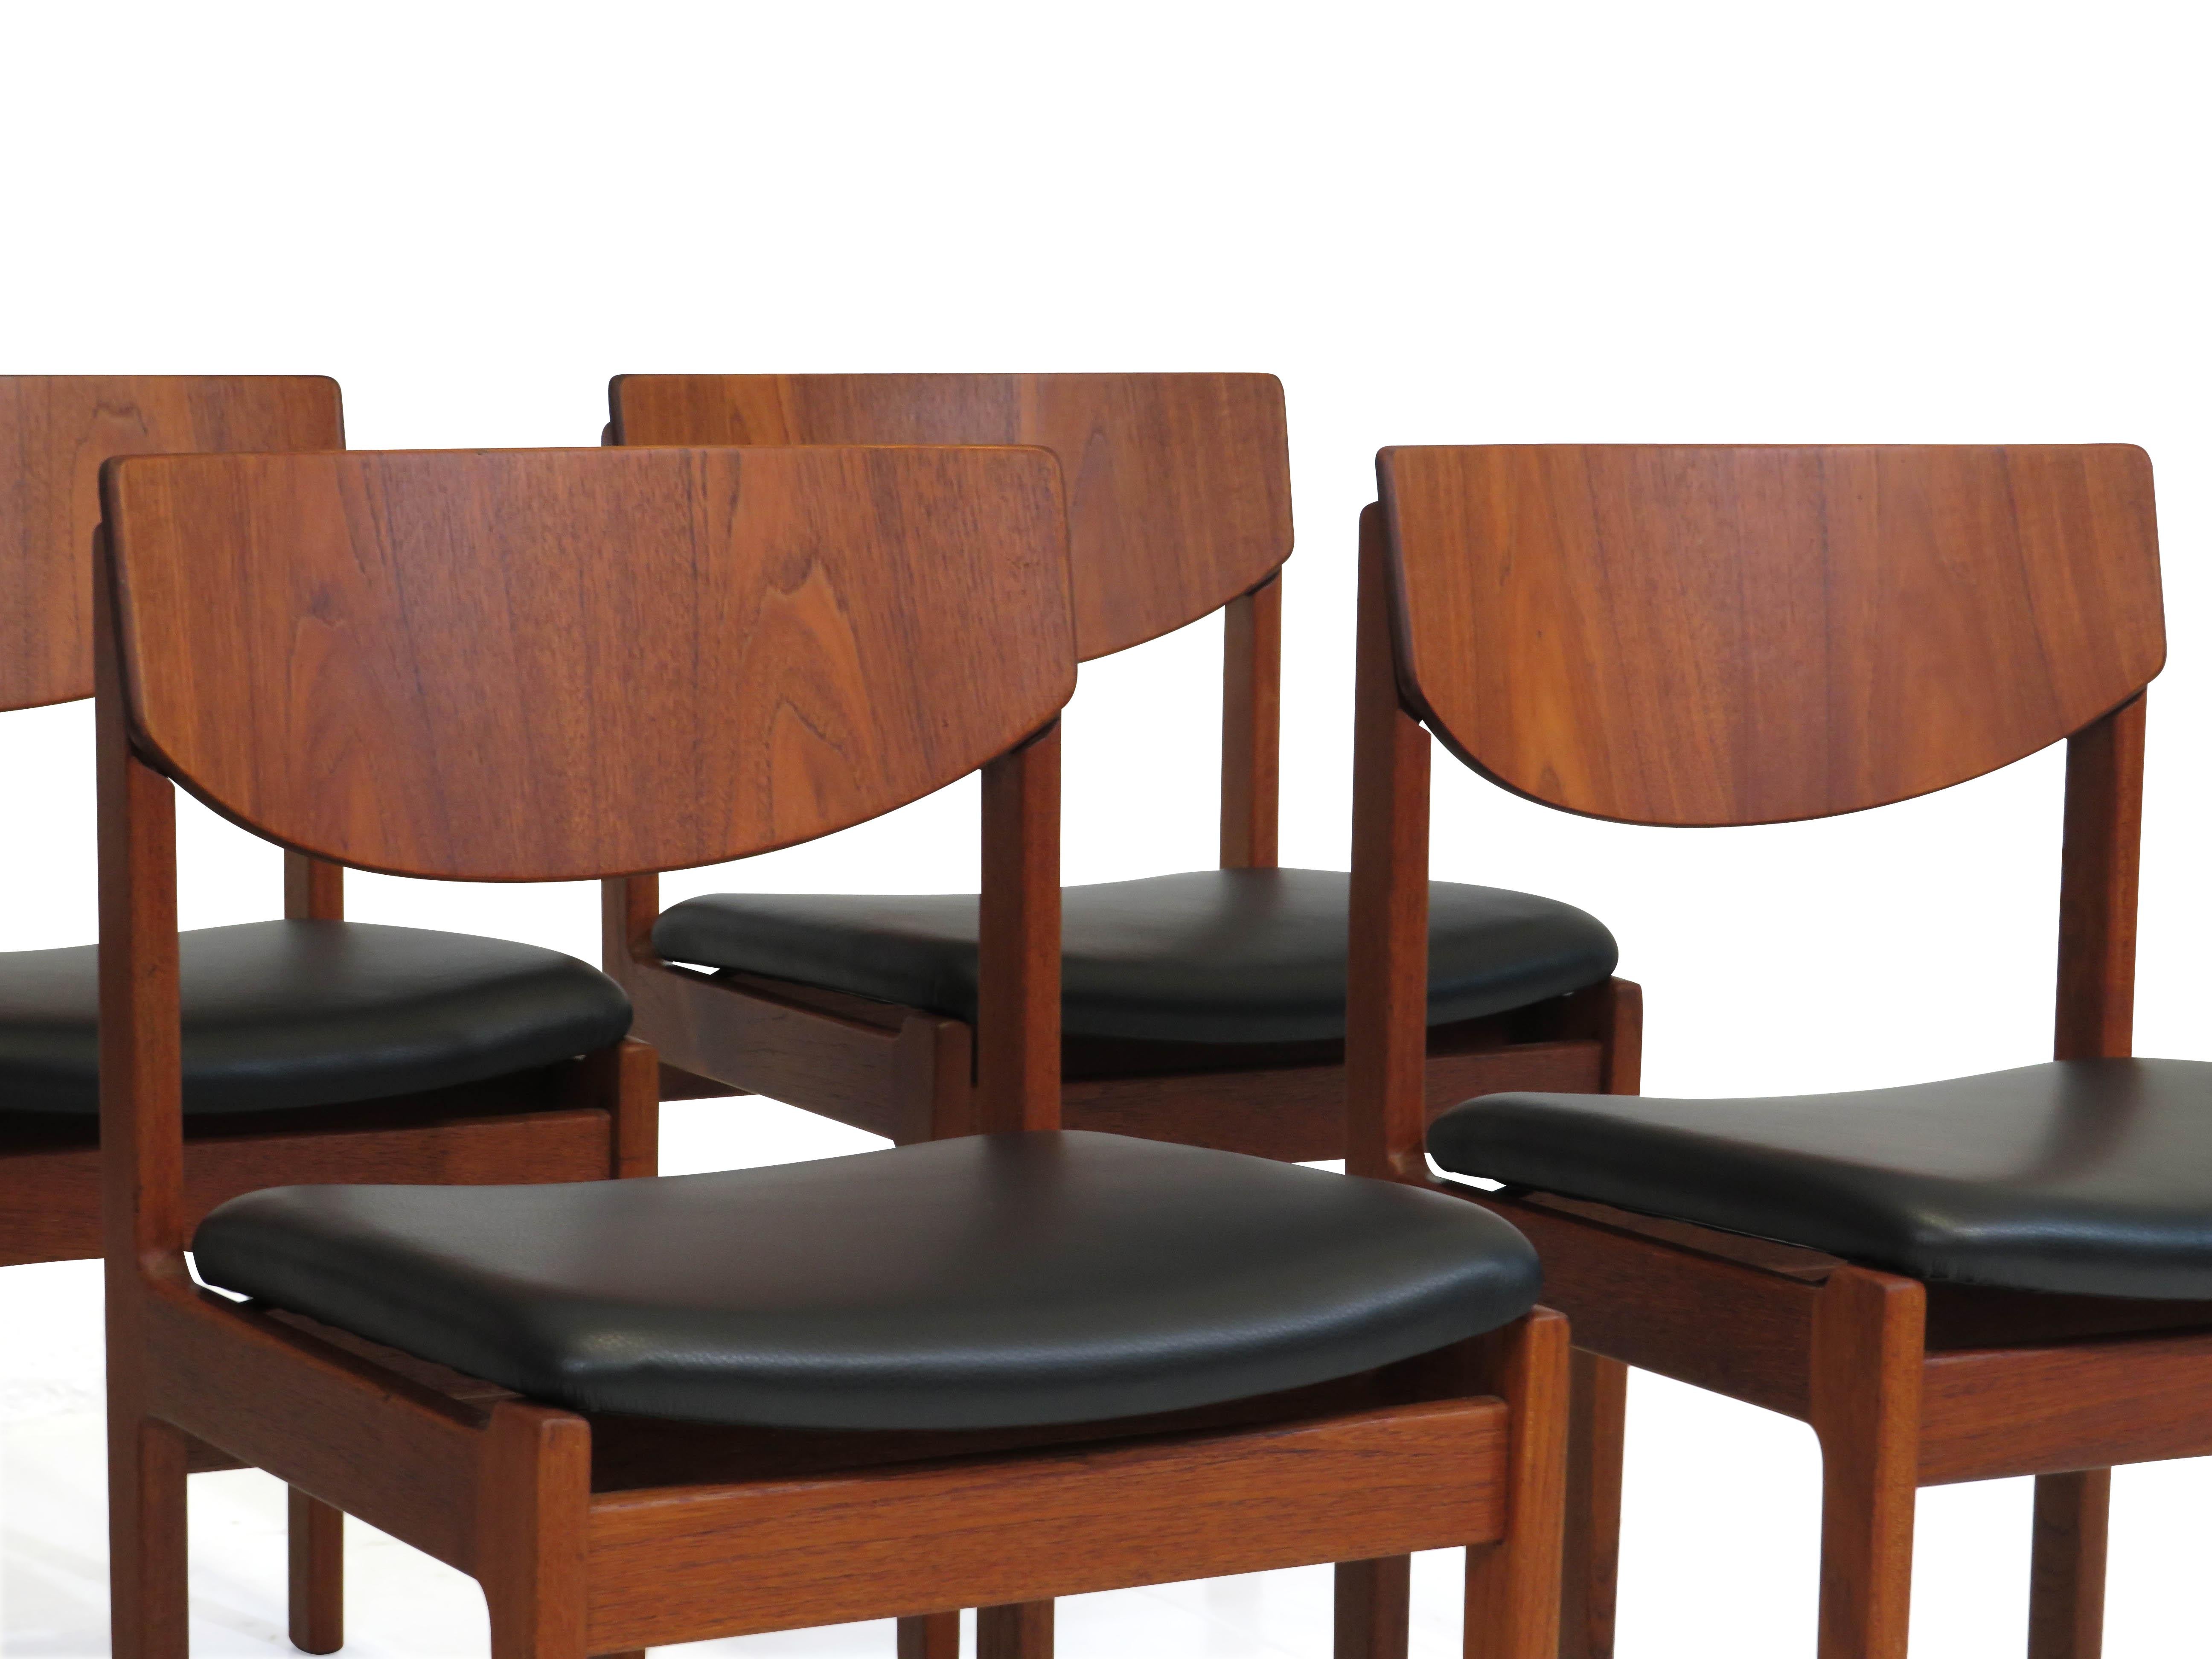 20th Century Danish Teak Dining Chairs in New Black Leather For Sale